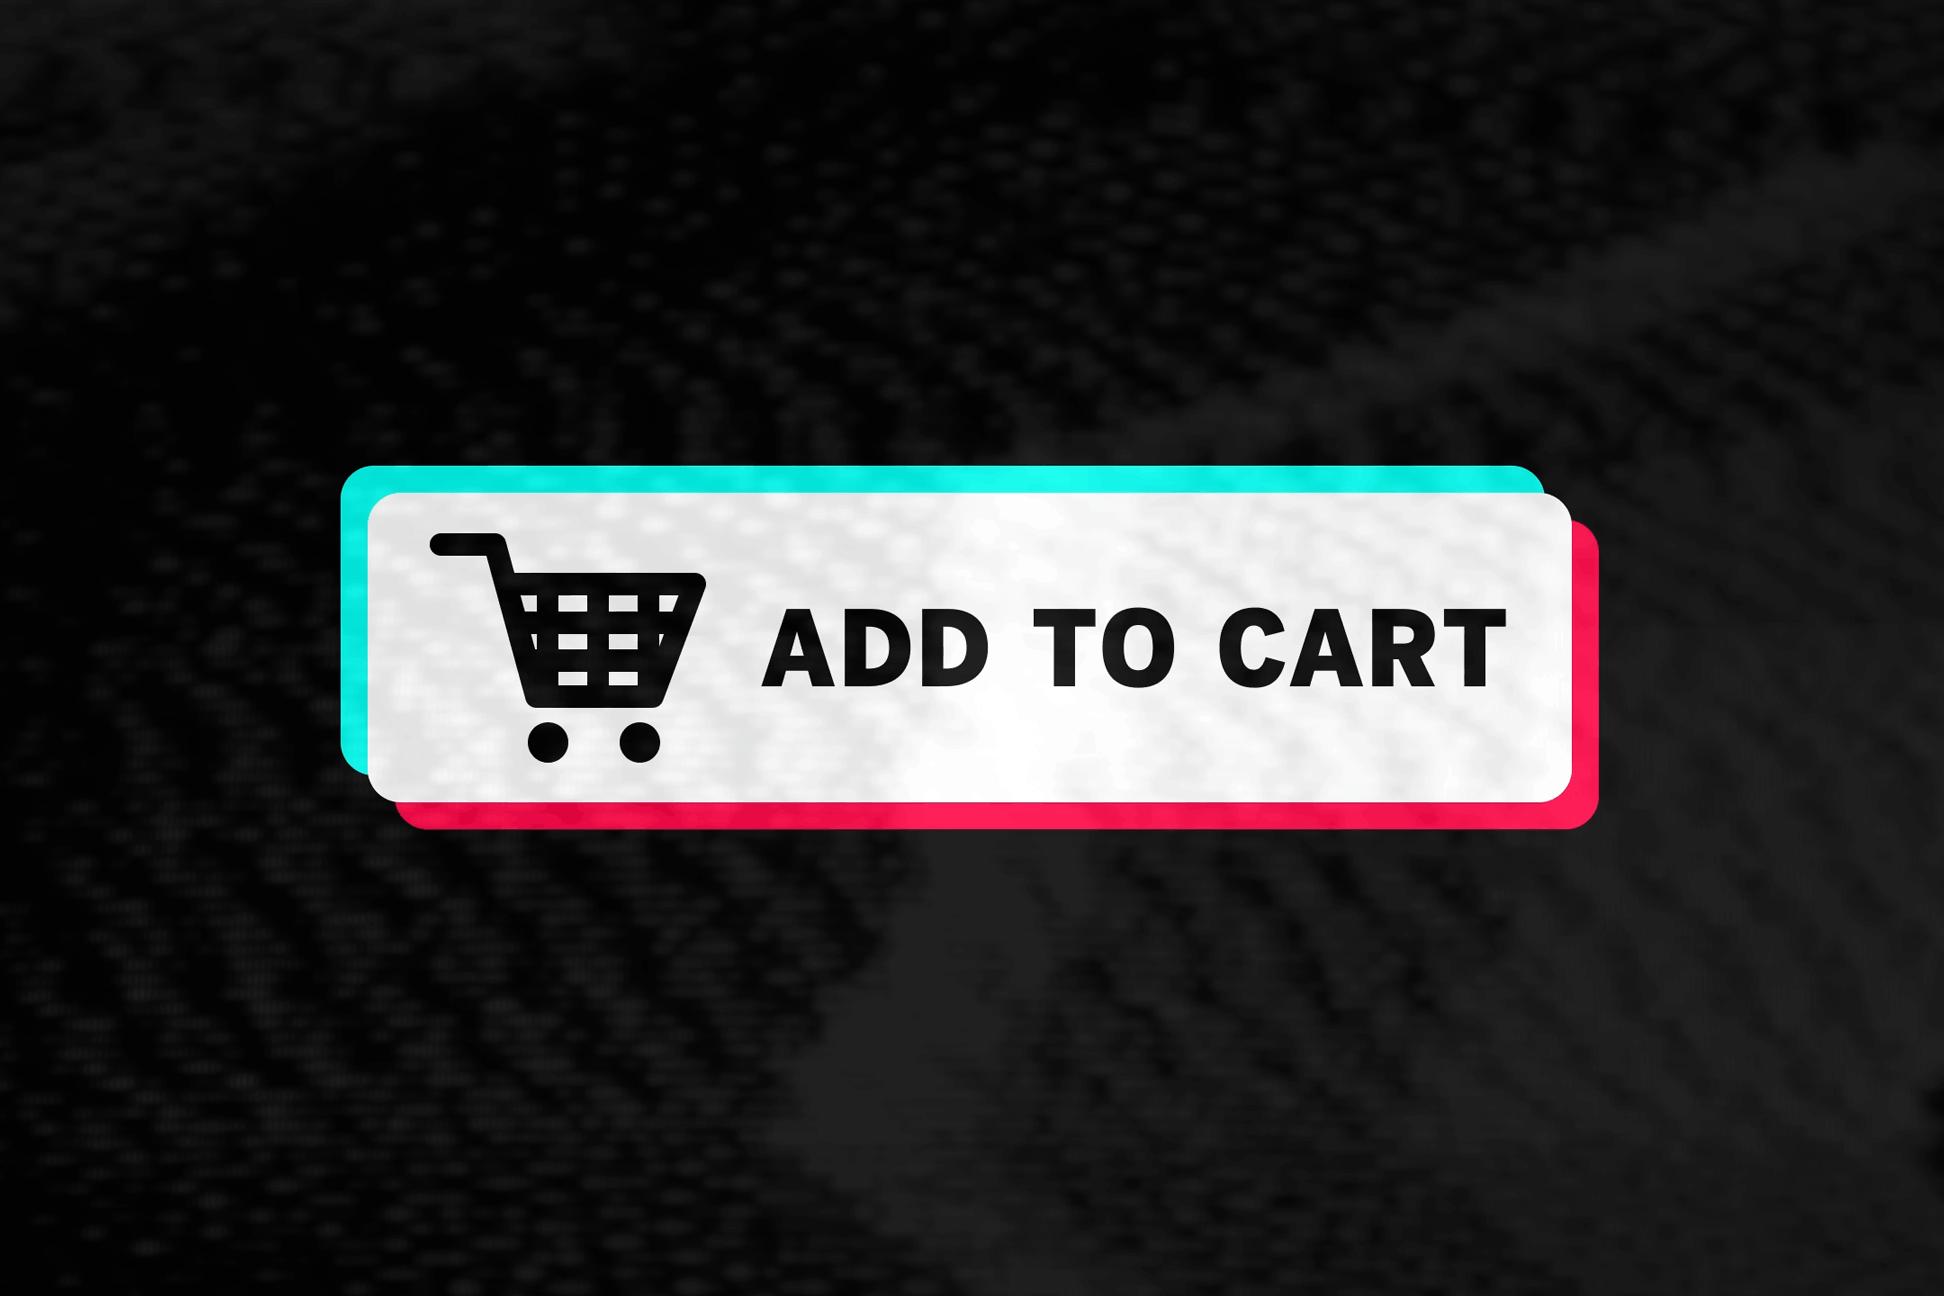 An "Add to cart" button in the style of the TikTok logo with a static overlay